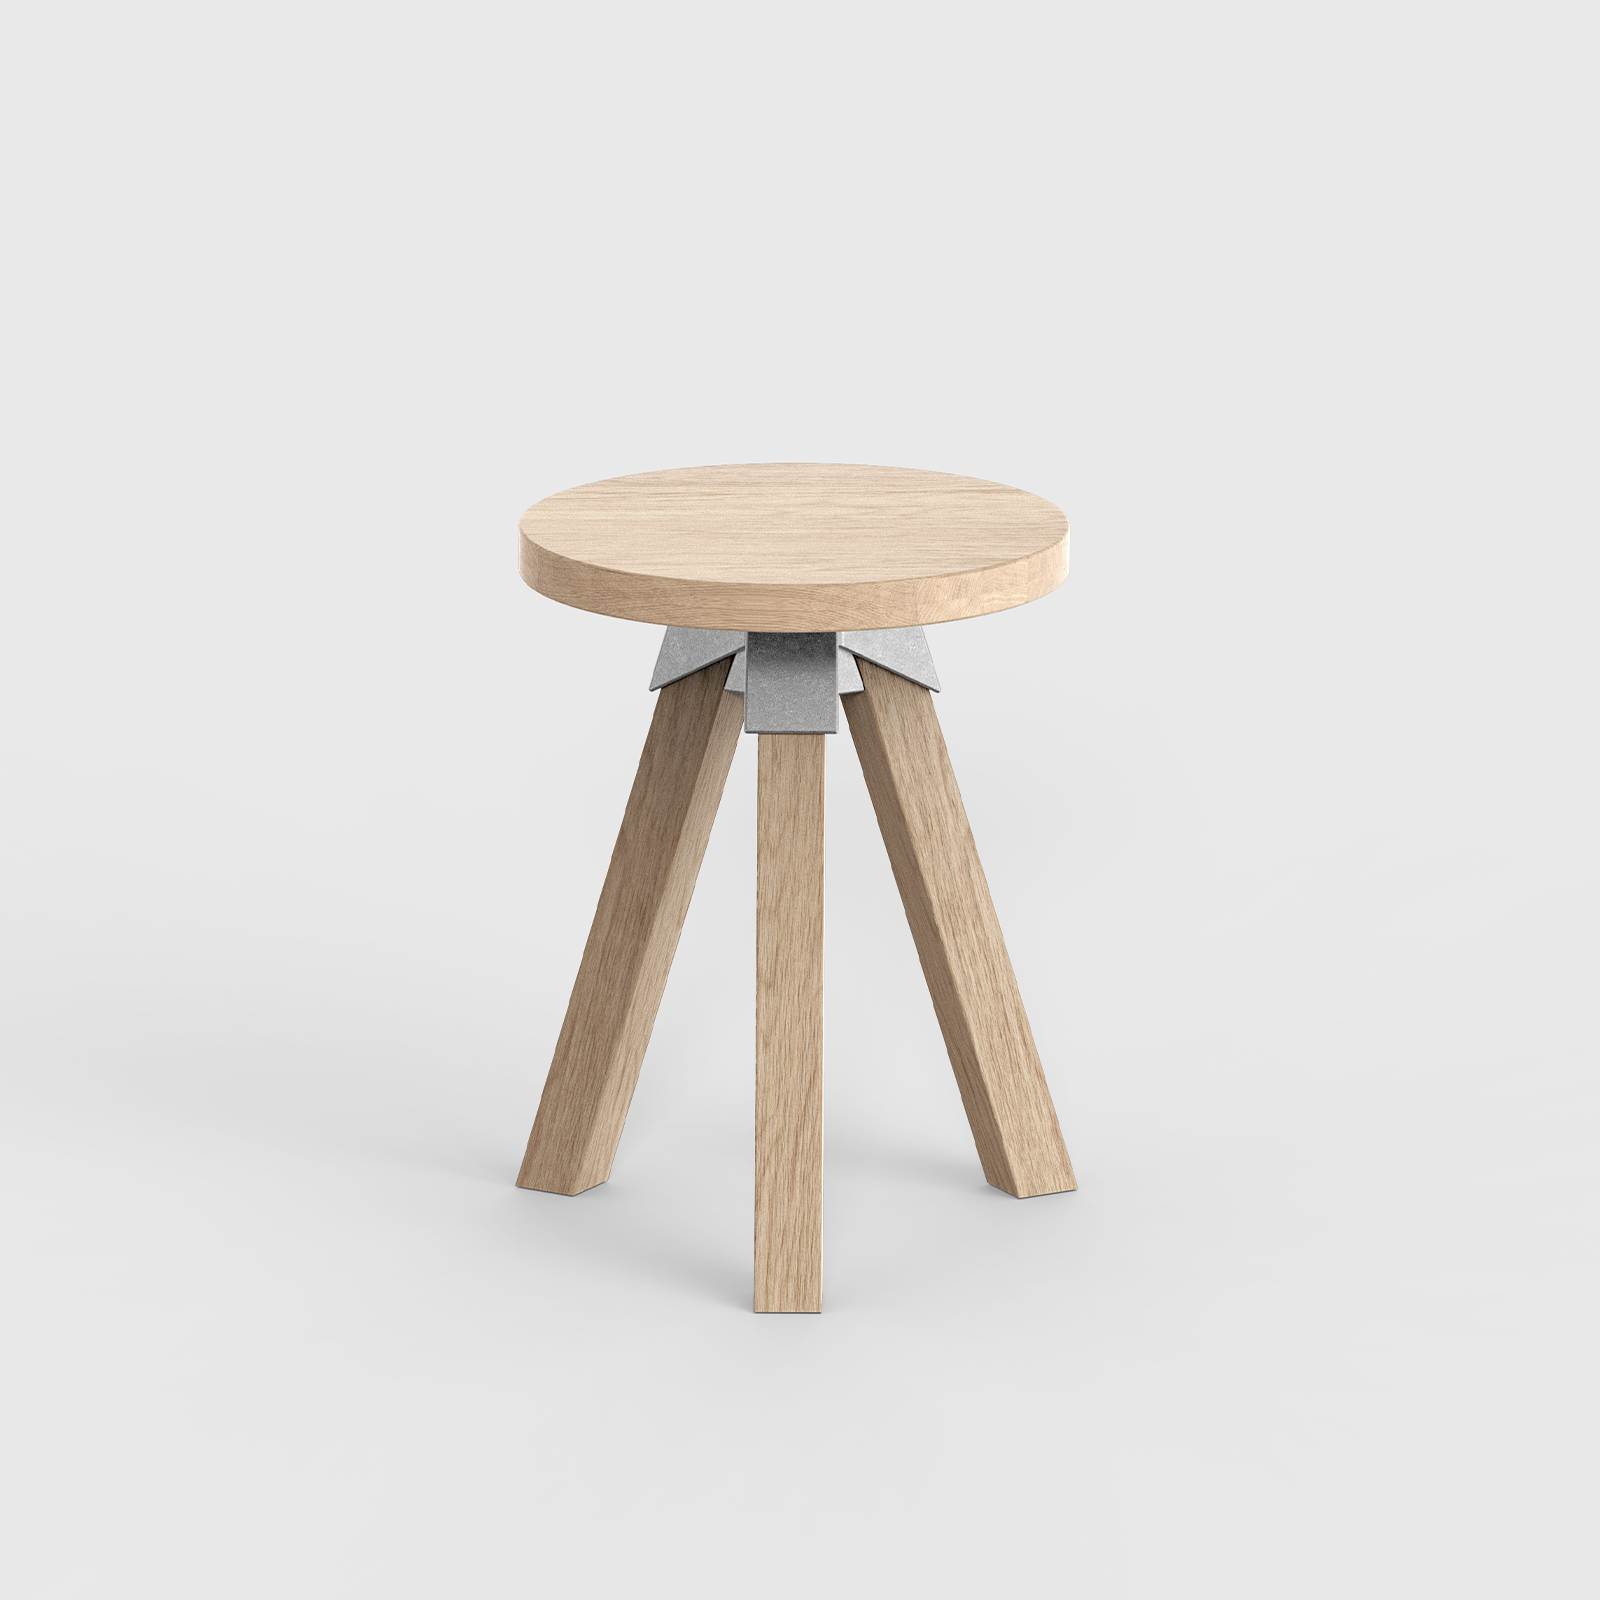 A-joint stool in solid American Oak with cast aluminium A-joint